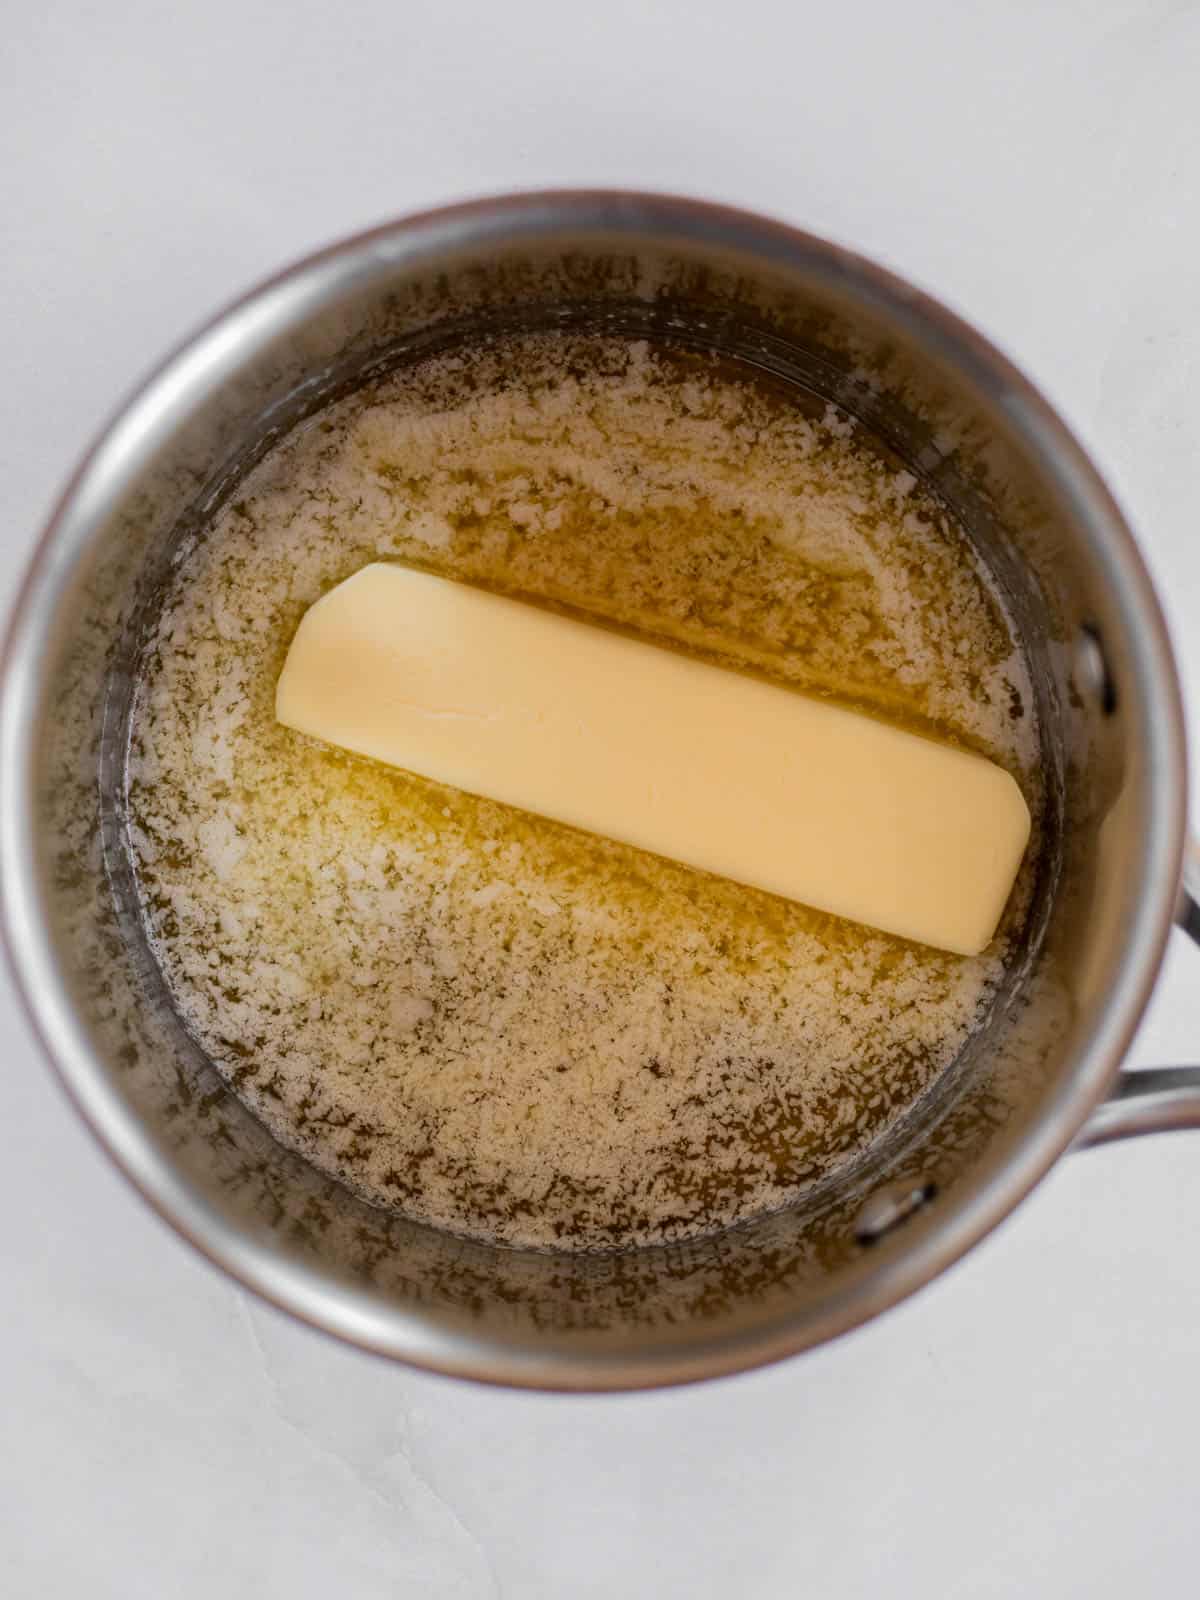 partially melted butter in a silver pot.